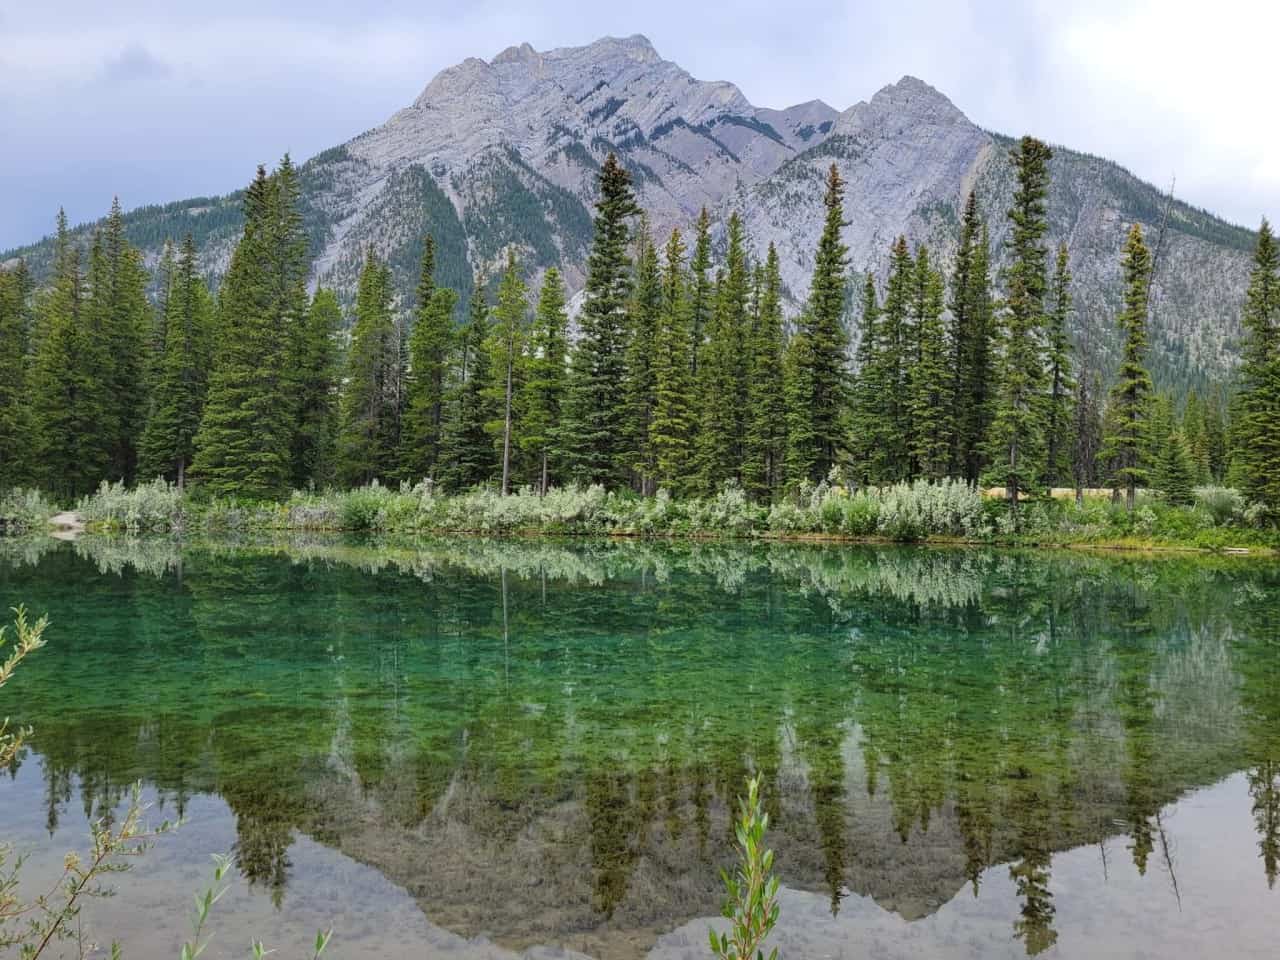 The reflections of the forests and mountain in the Bow Valley Provincial Park in Alberta Canada.